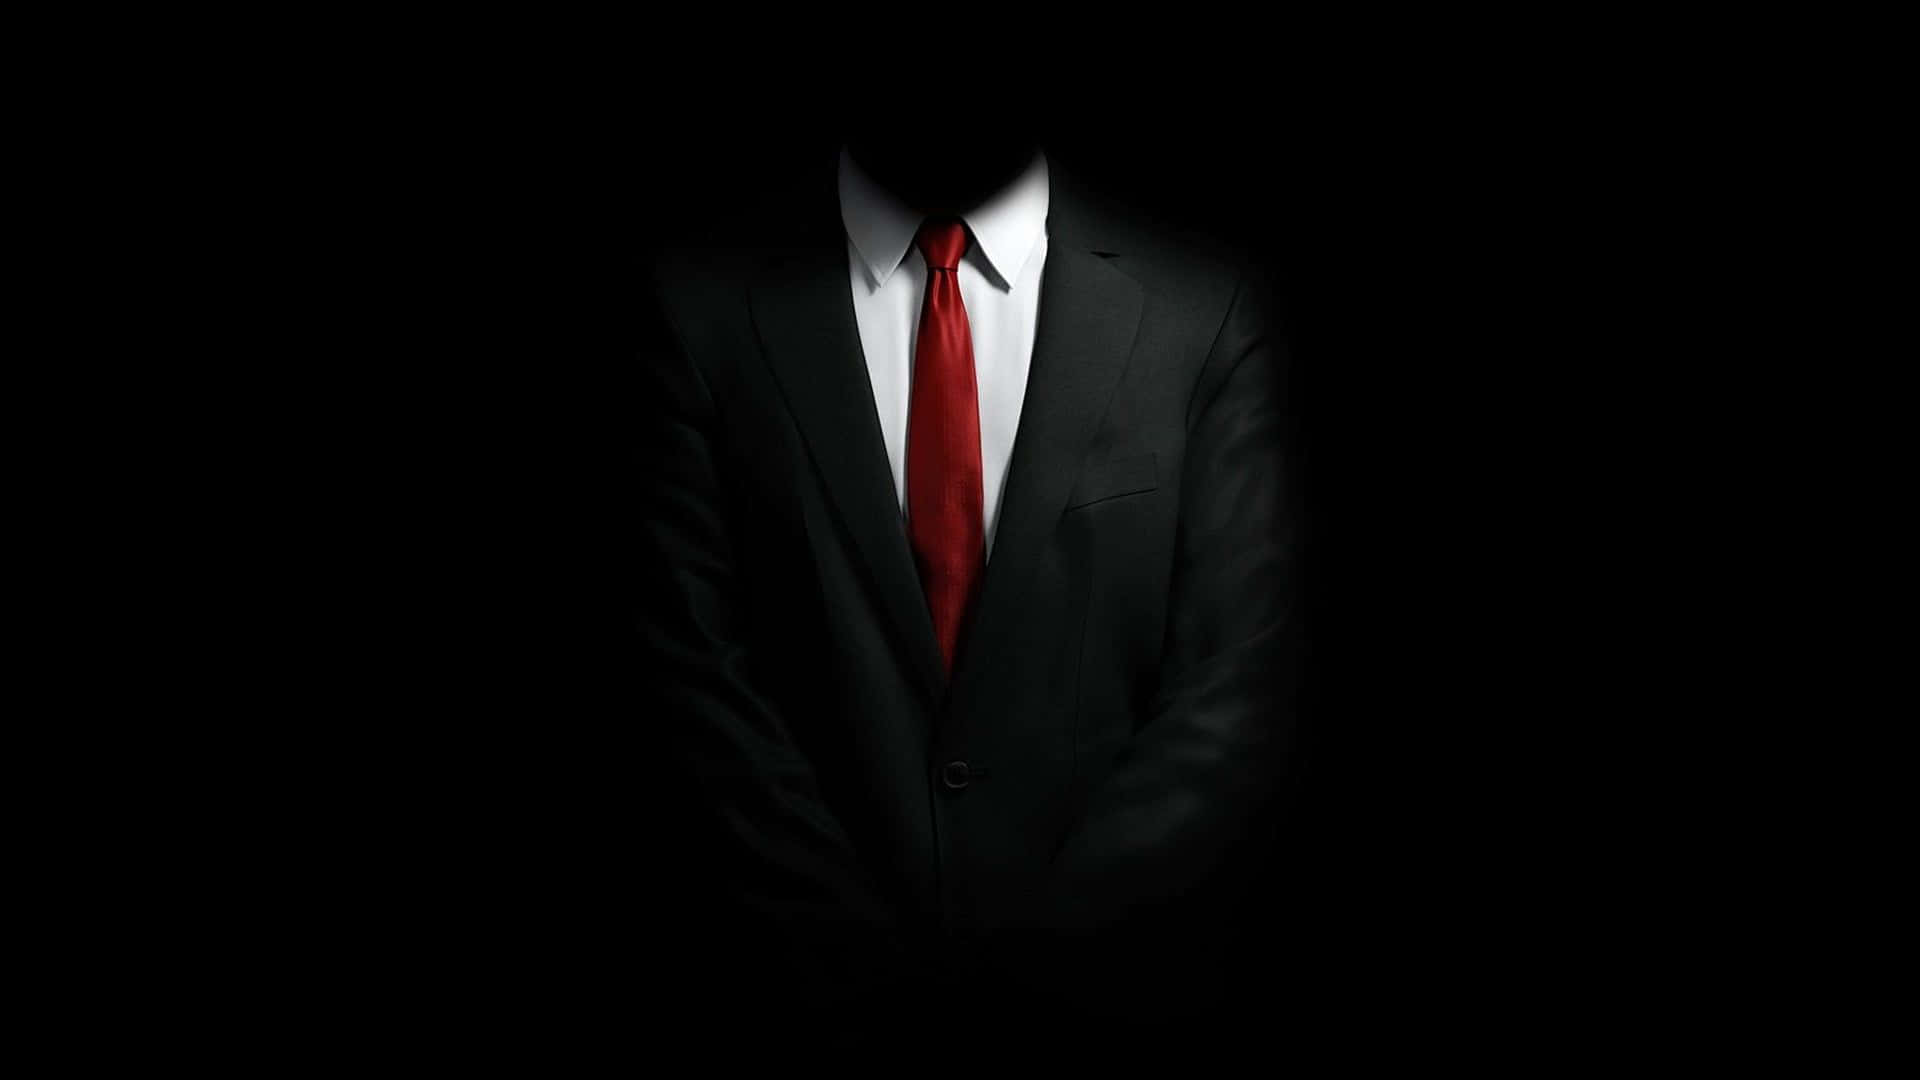 A Man In A Suit And Tie Is Standing In The Dark